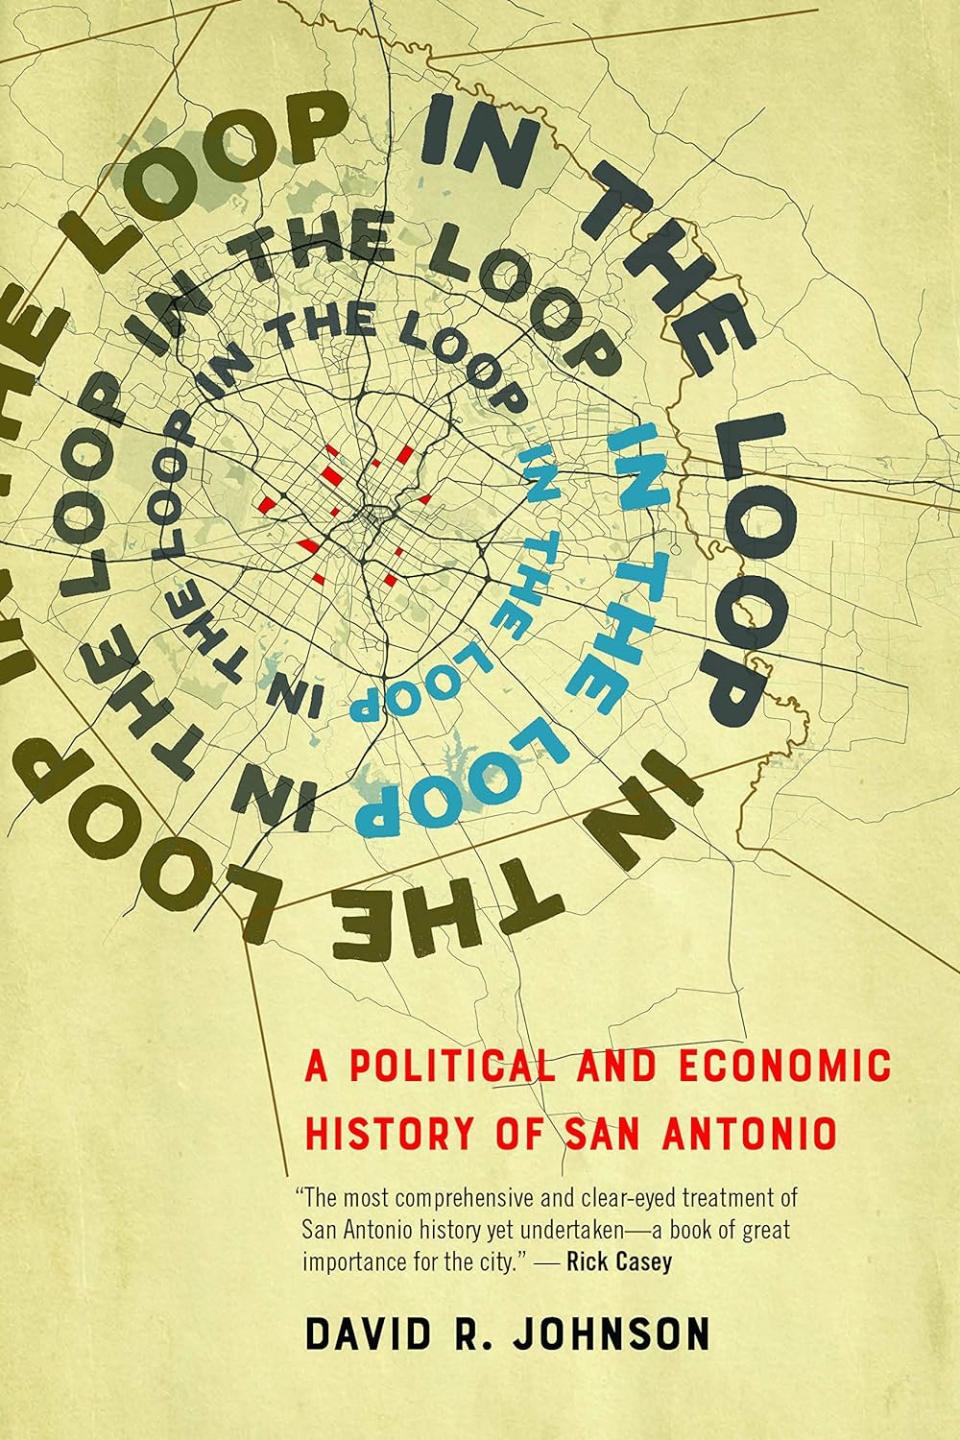 "In the Loop" is a superb urban history of San Antonio by David B. Johnson.